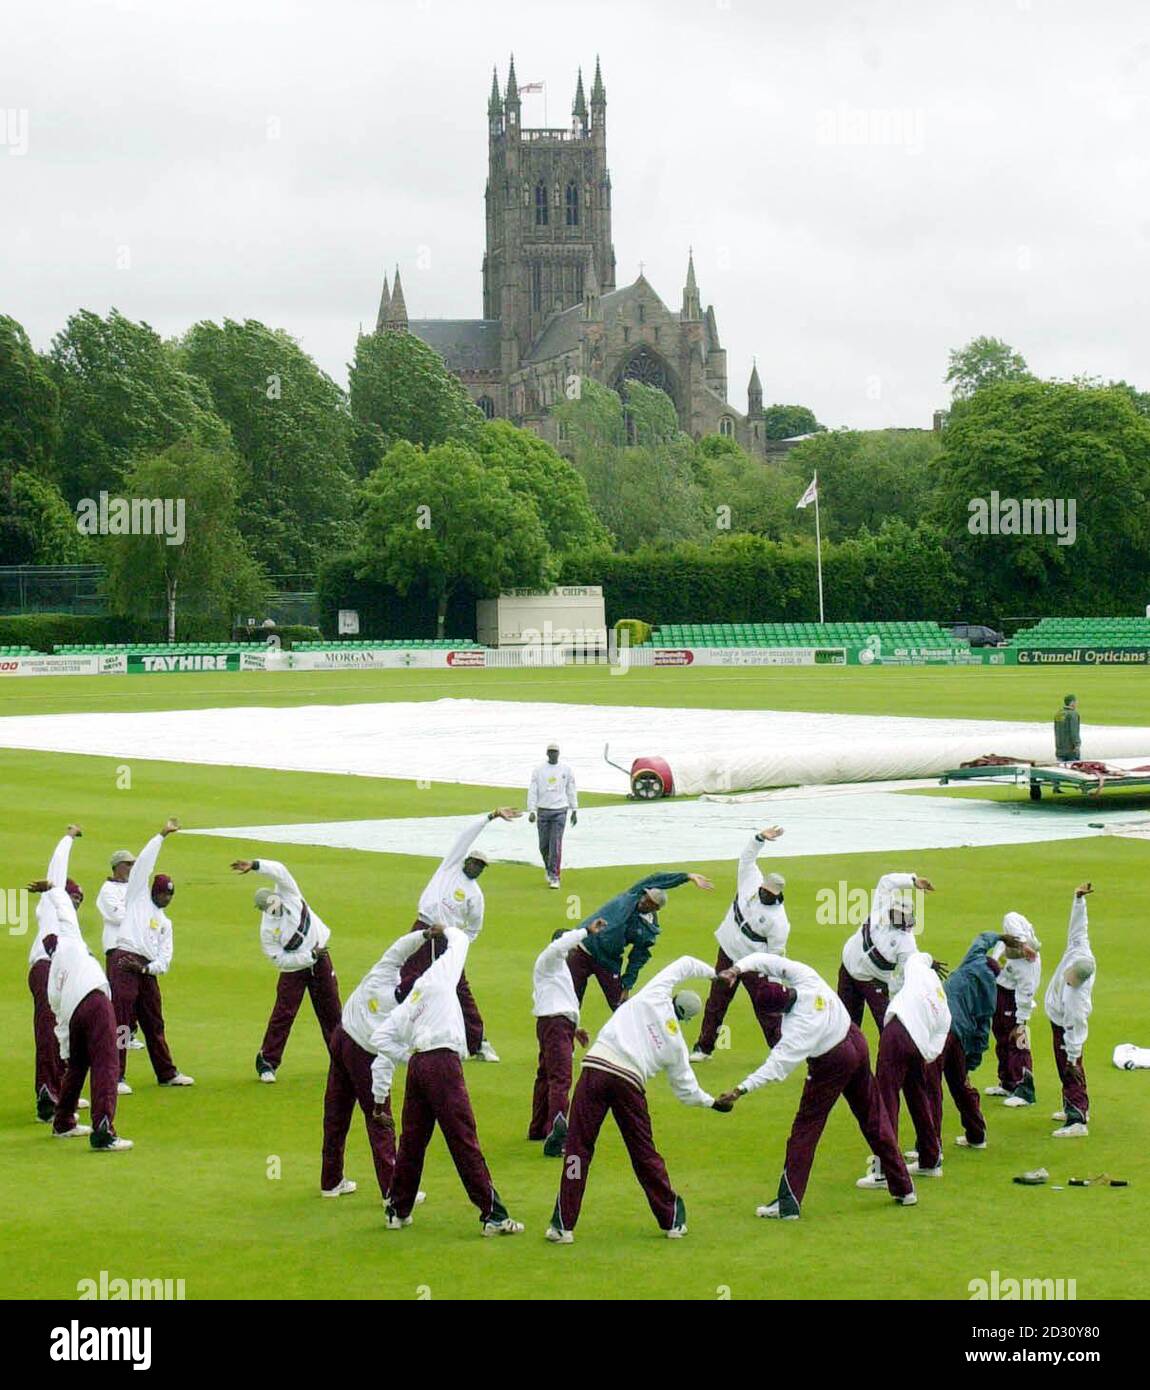 The West Indies cricket team warming up at Worcestershire County Cricket  Club, Worcester. The weather delayed the start of a practice session for  the side ahead of a test series against England